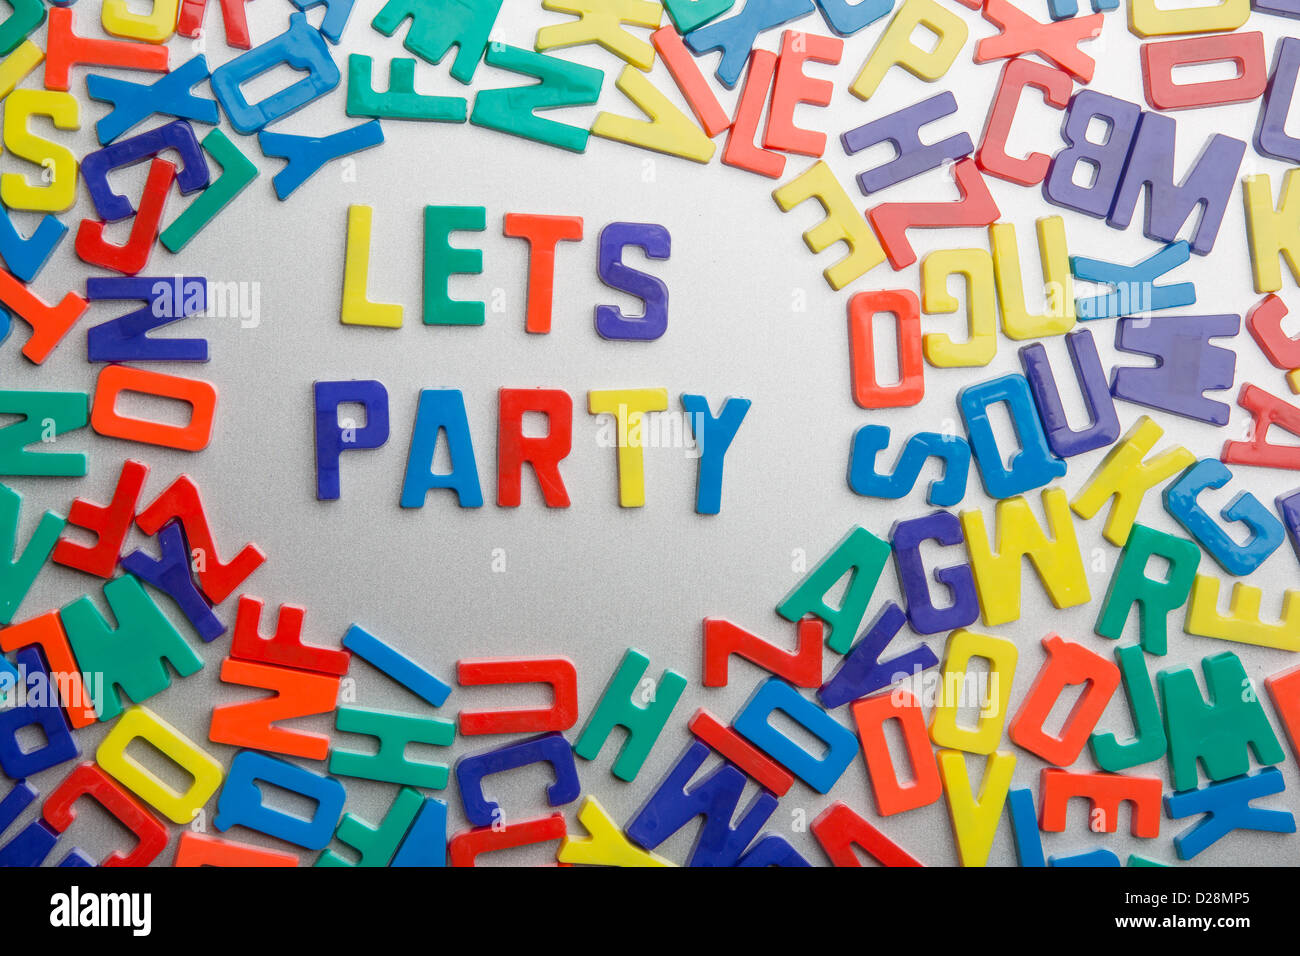 'Lets Party' - Refrigerator magnets spell a message out of a jumble of letters Stock Photo